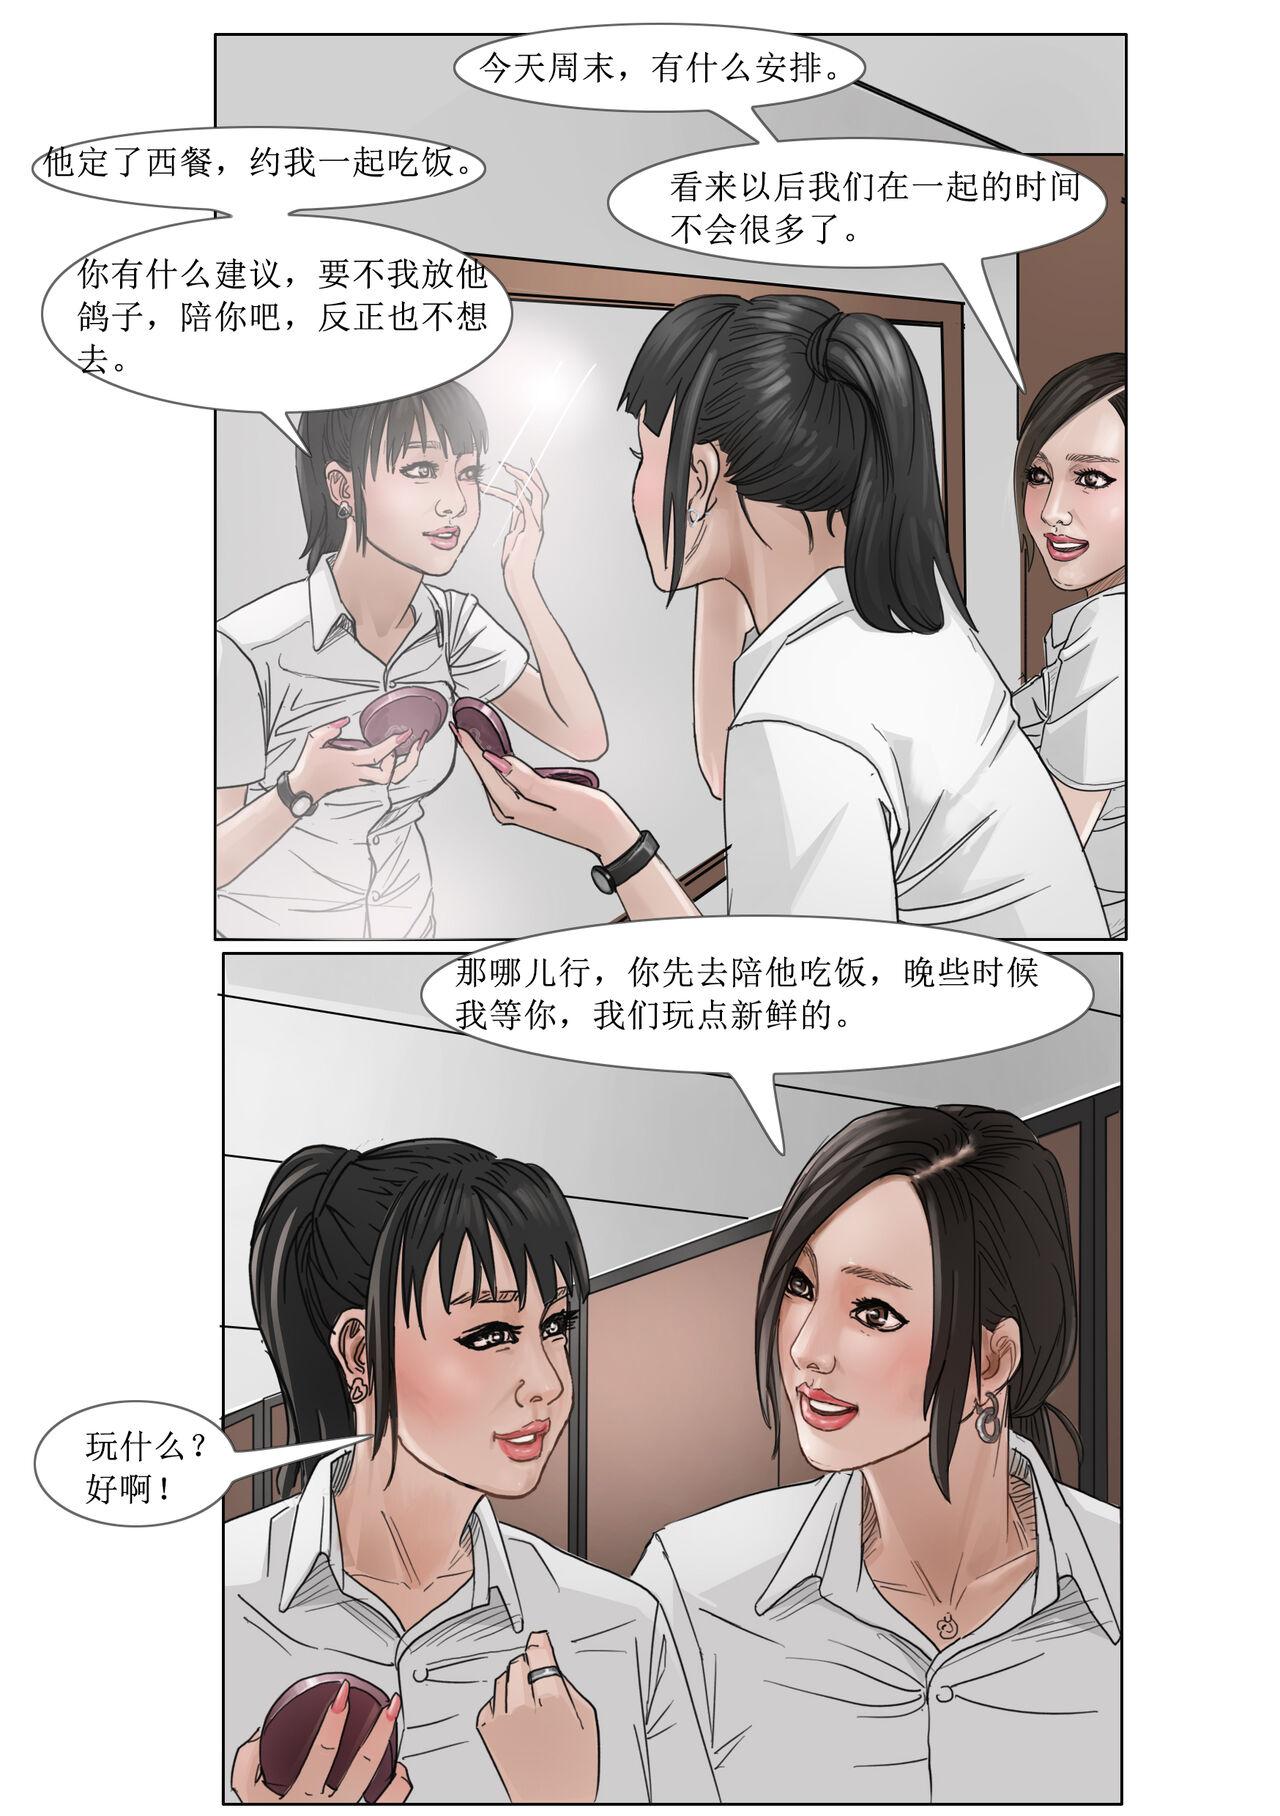 Fudendo 枫语Foryou《阿花与阿朵》第一话 A hua and A duo 1 Chinese Gay Medical - Page 10